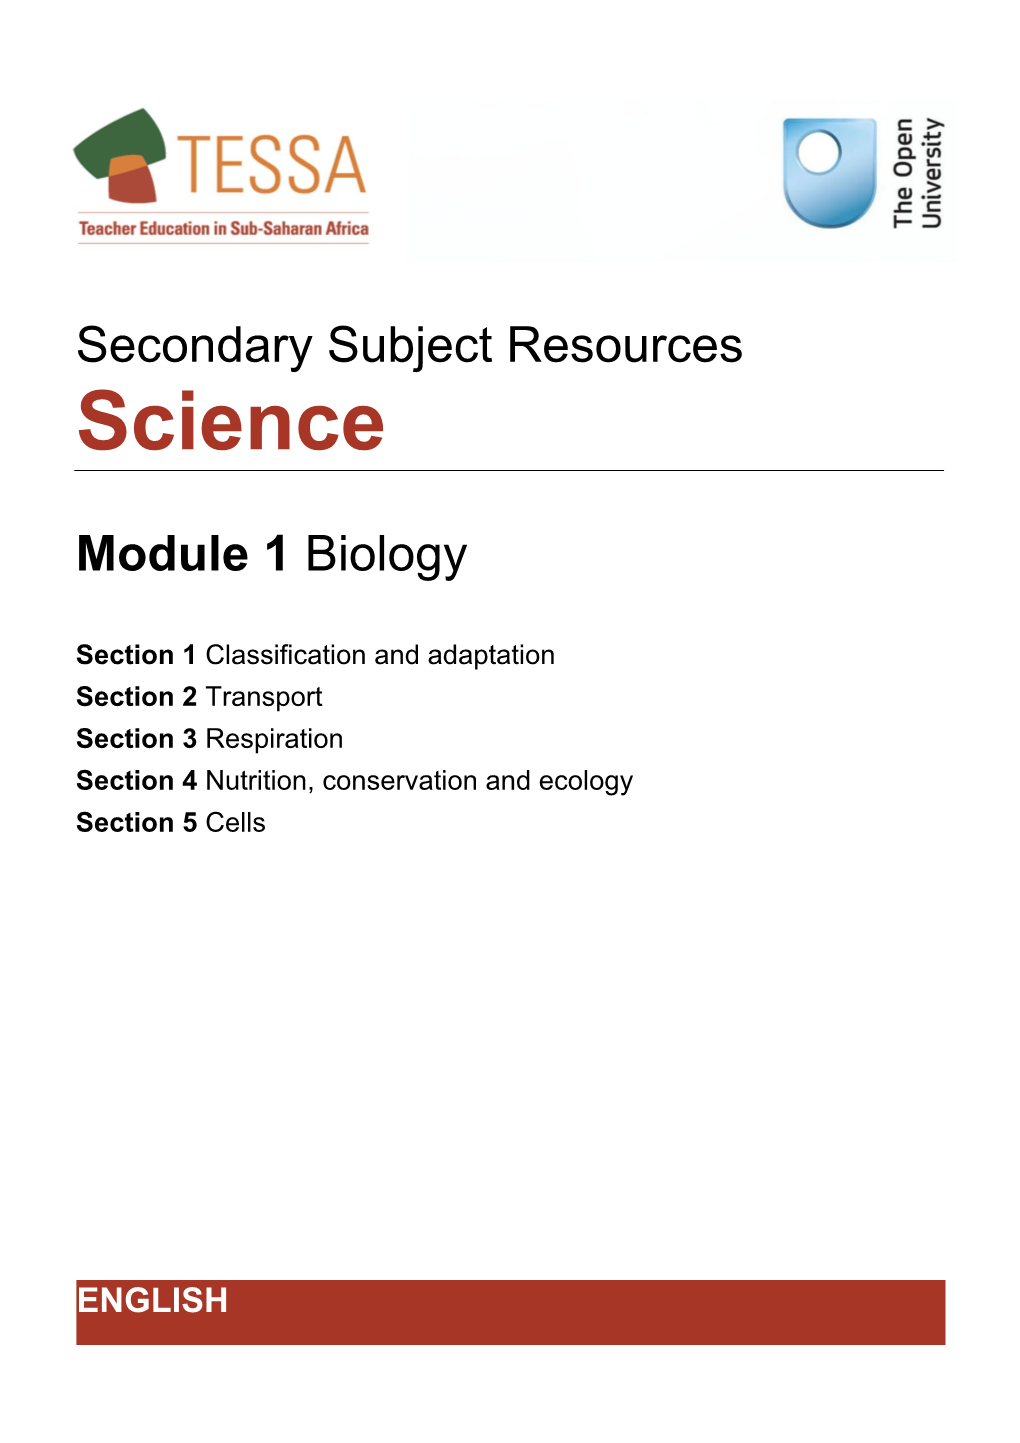 Module 1: Secondary Science - Biology